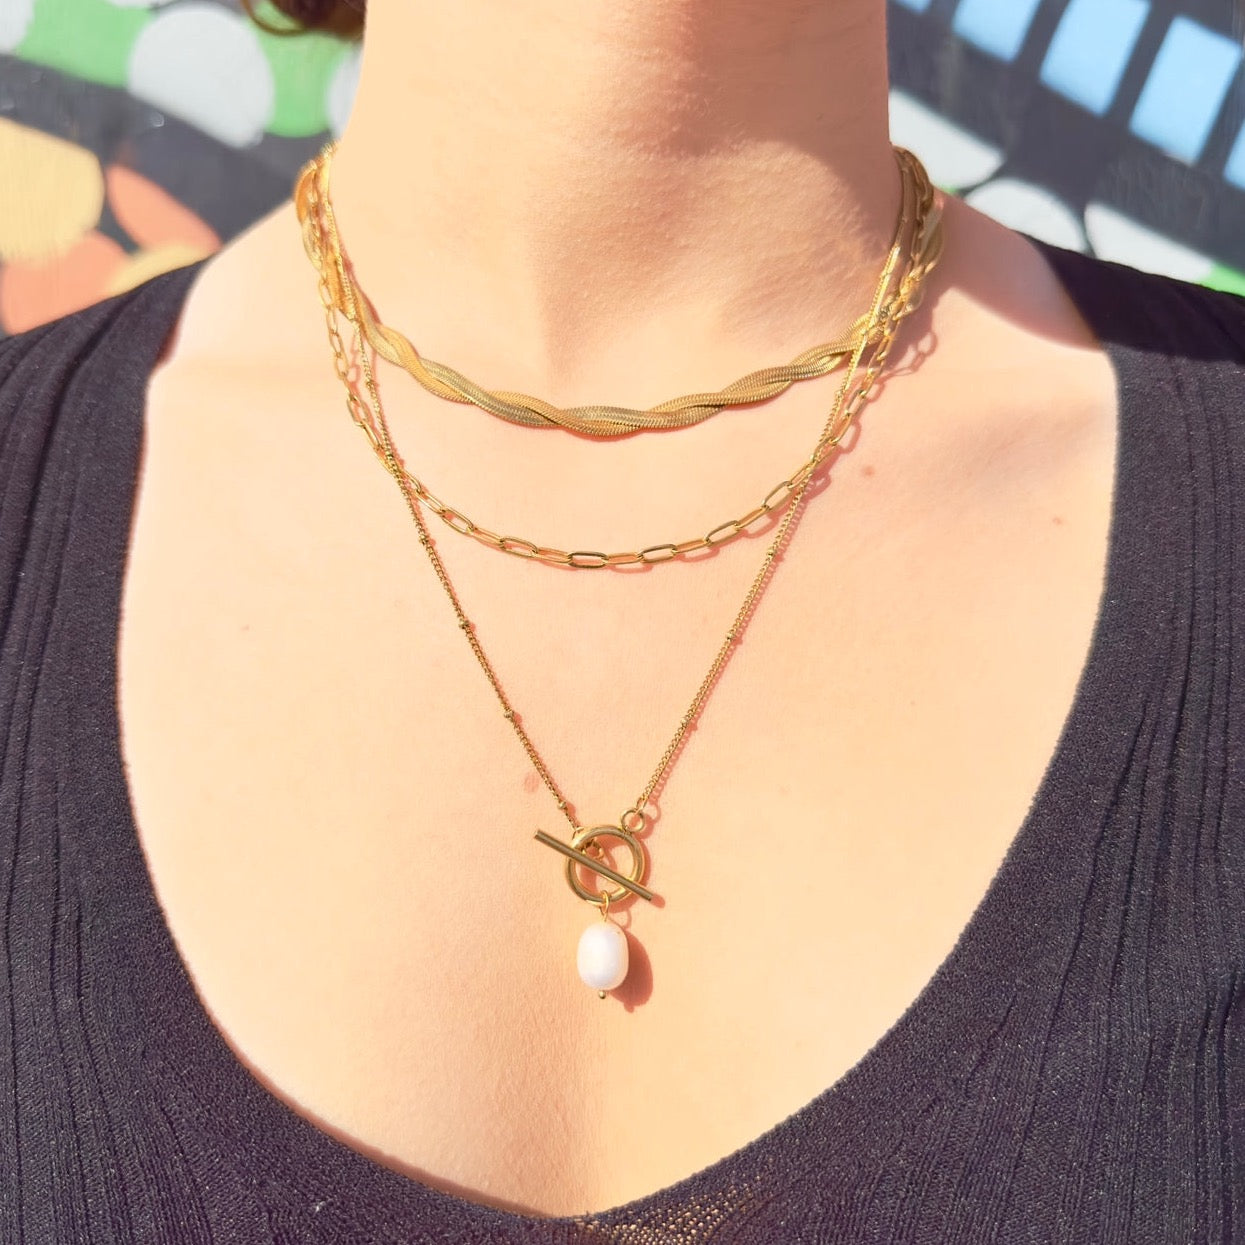 Laneway Chain Necklace ** PRE-ORDER ** - Ever Jewellery 